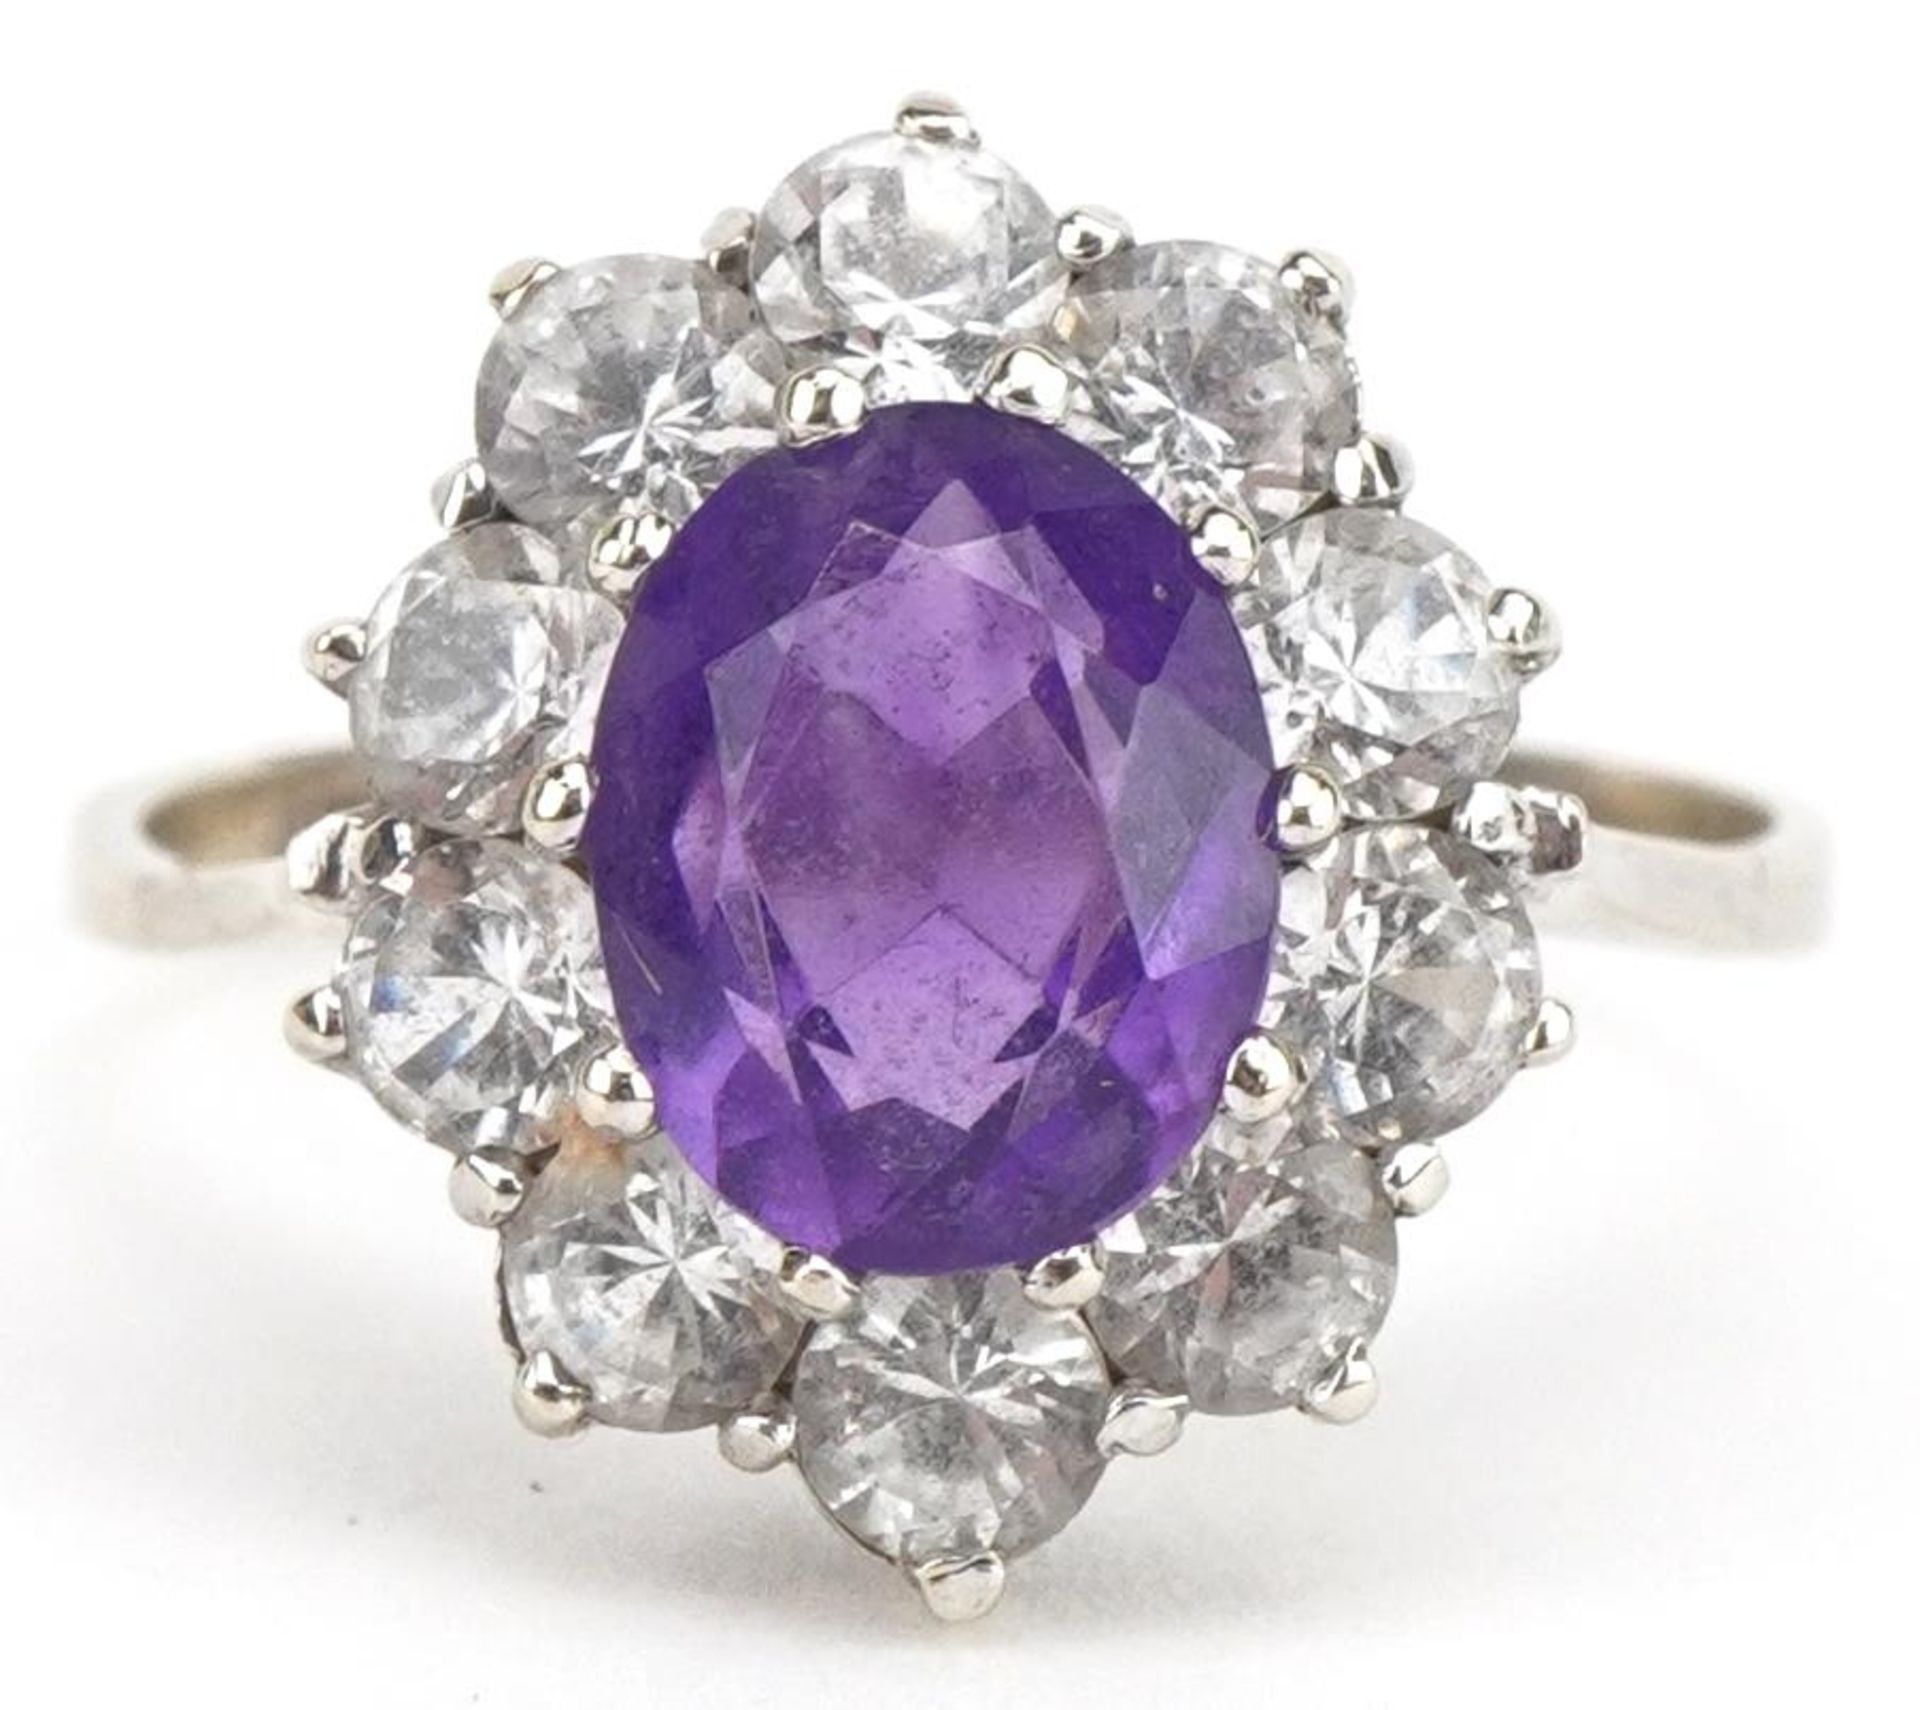 14ct white gold amethyst and white spinel cluster ring, size Q, 3.3g : For further information on